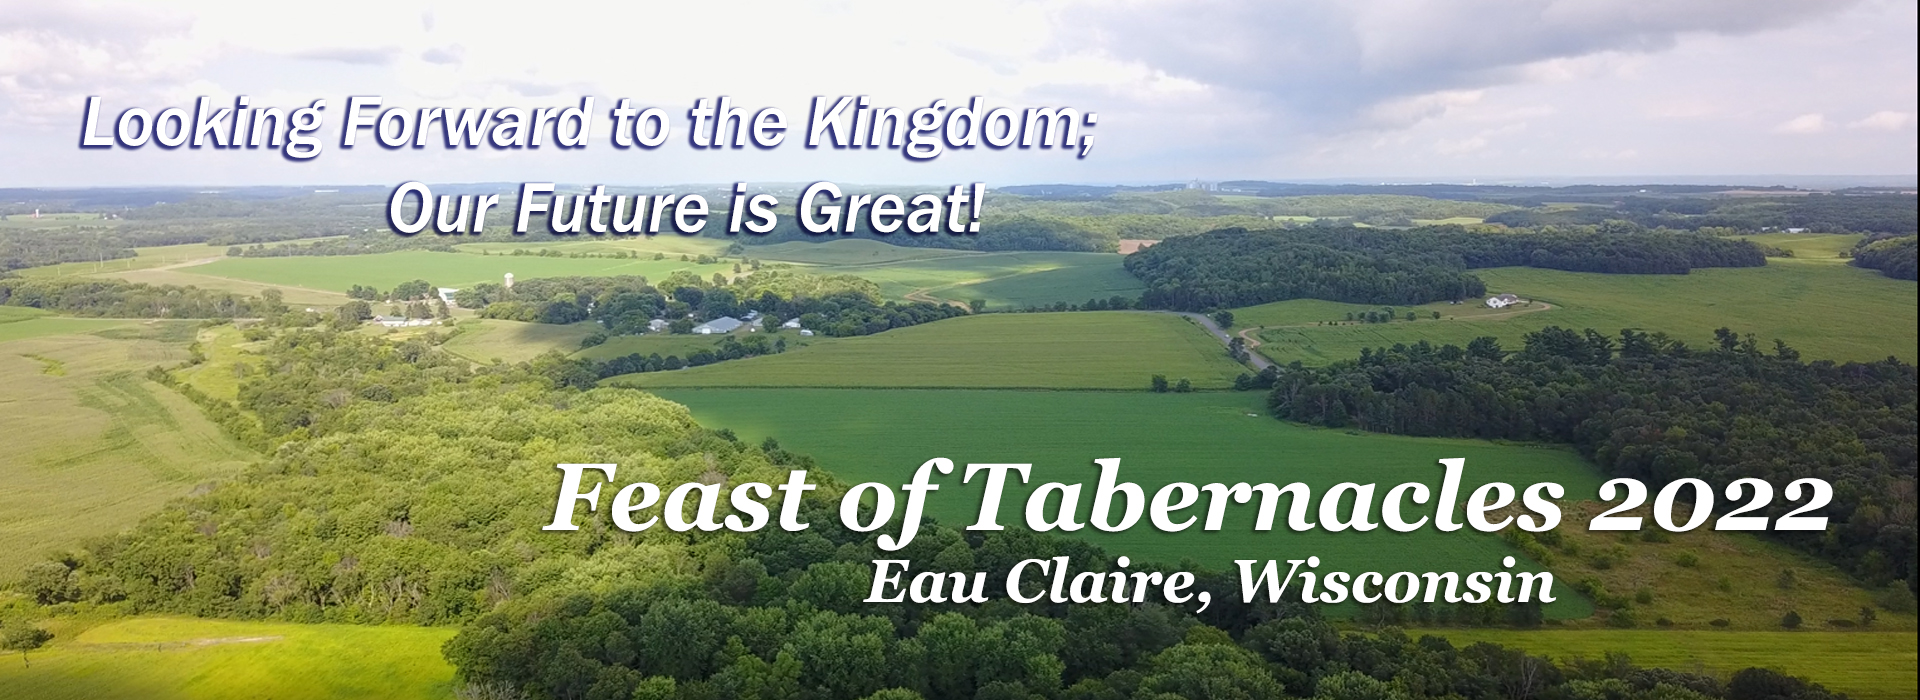 Feast of Tabernacles 2022 -Eau Claire, WI